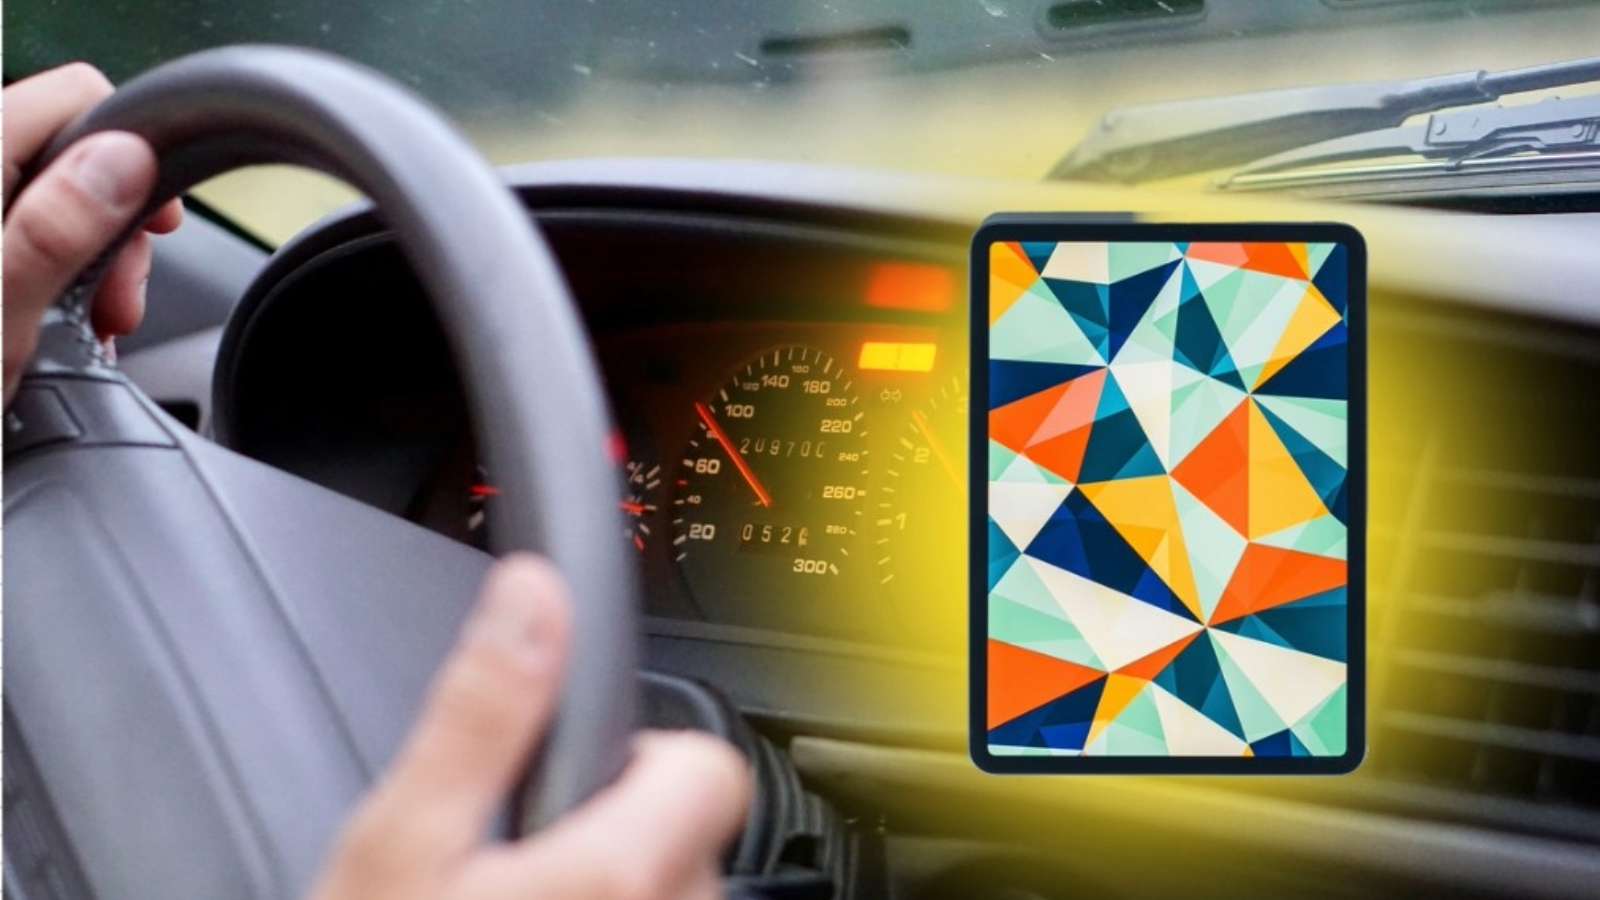 image of an iPad with a car's interior background.